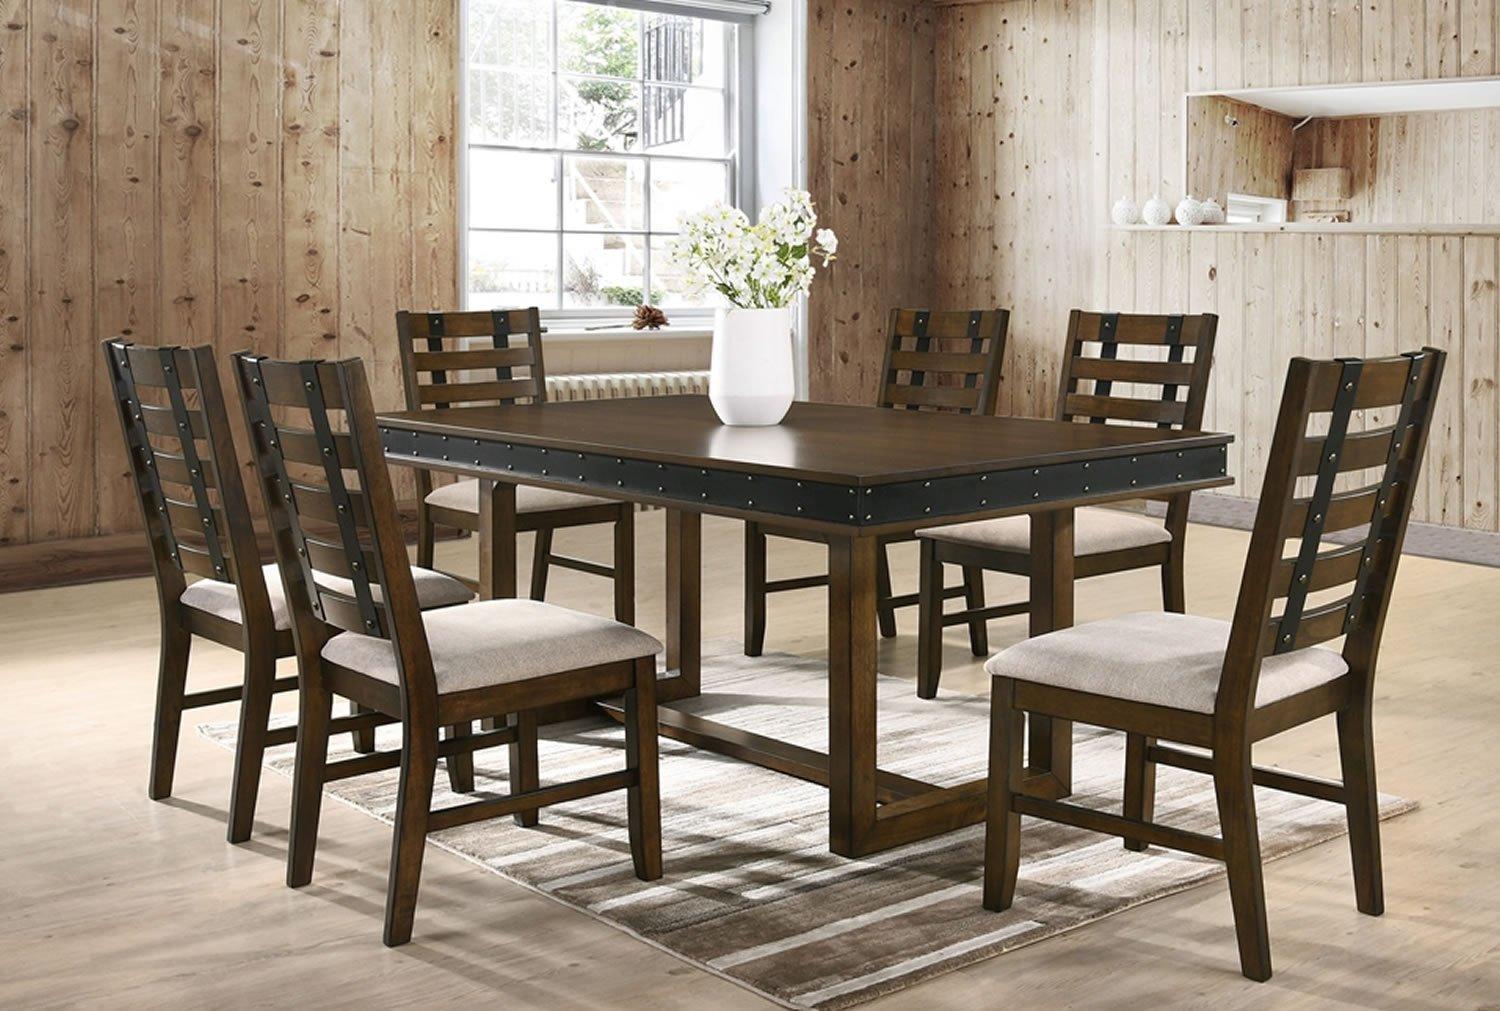 Traditional Dining Sets D8005 DINING SET D8005 DINING SET-7 in Brown, Beige Fabric